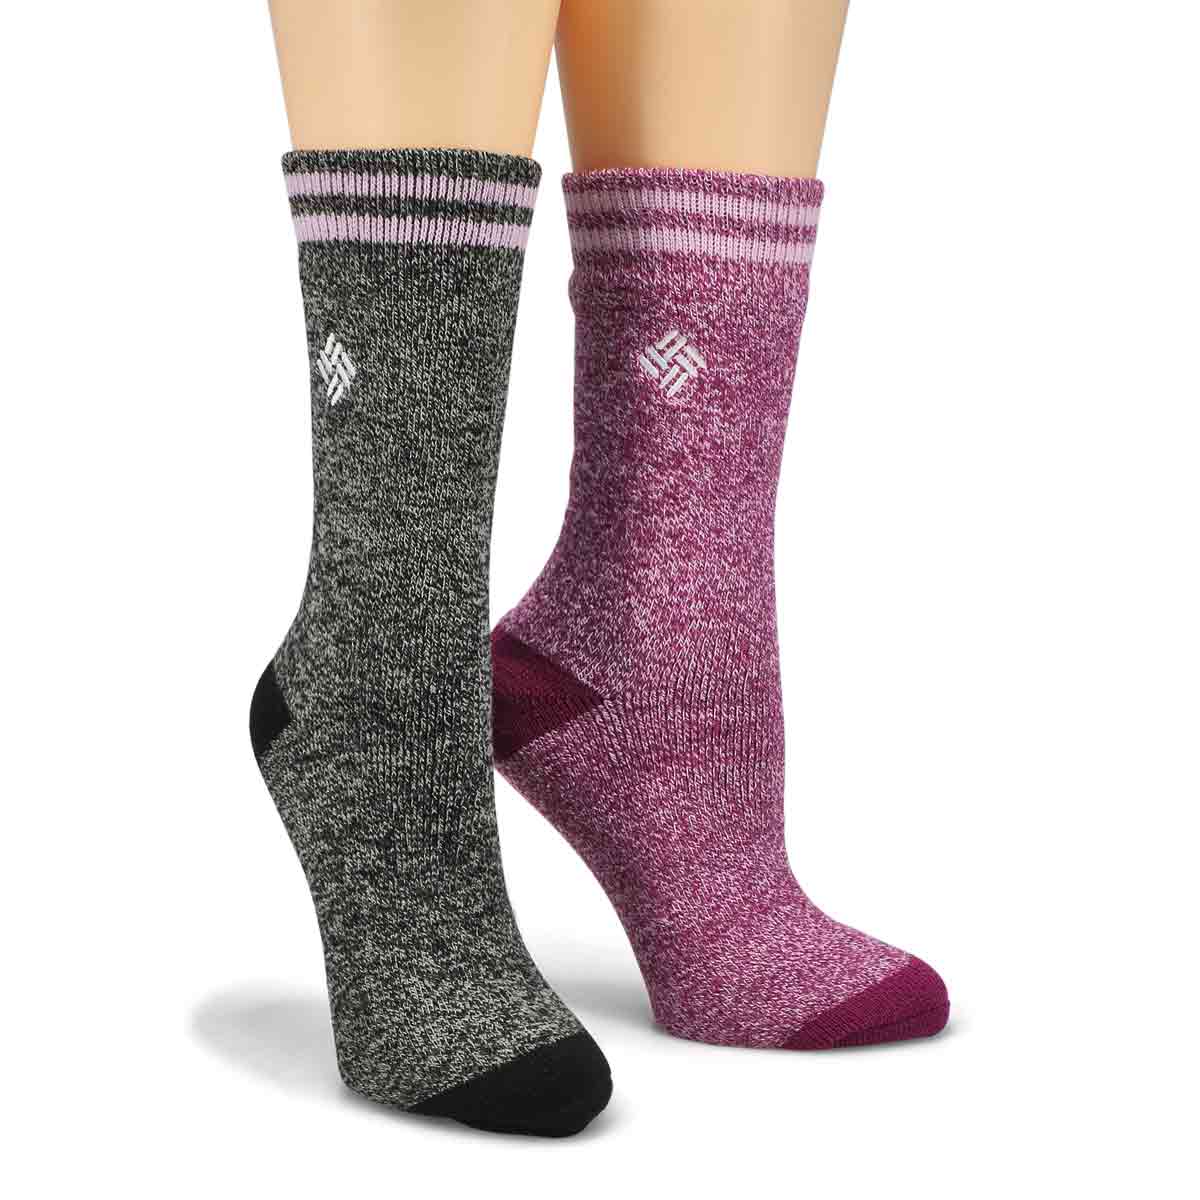 Women's Weight Thermal Crew Sock - 2 Pack